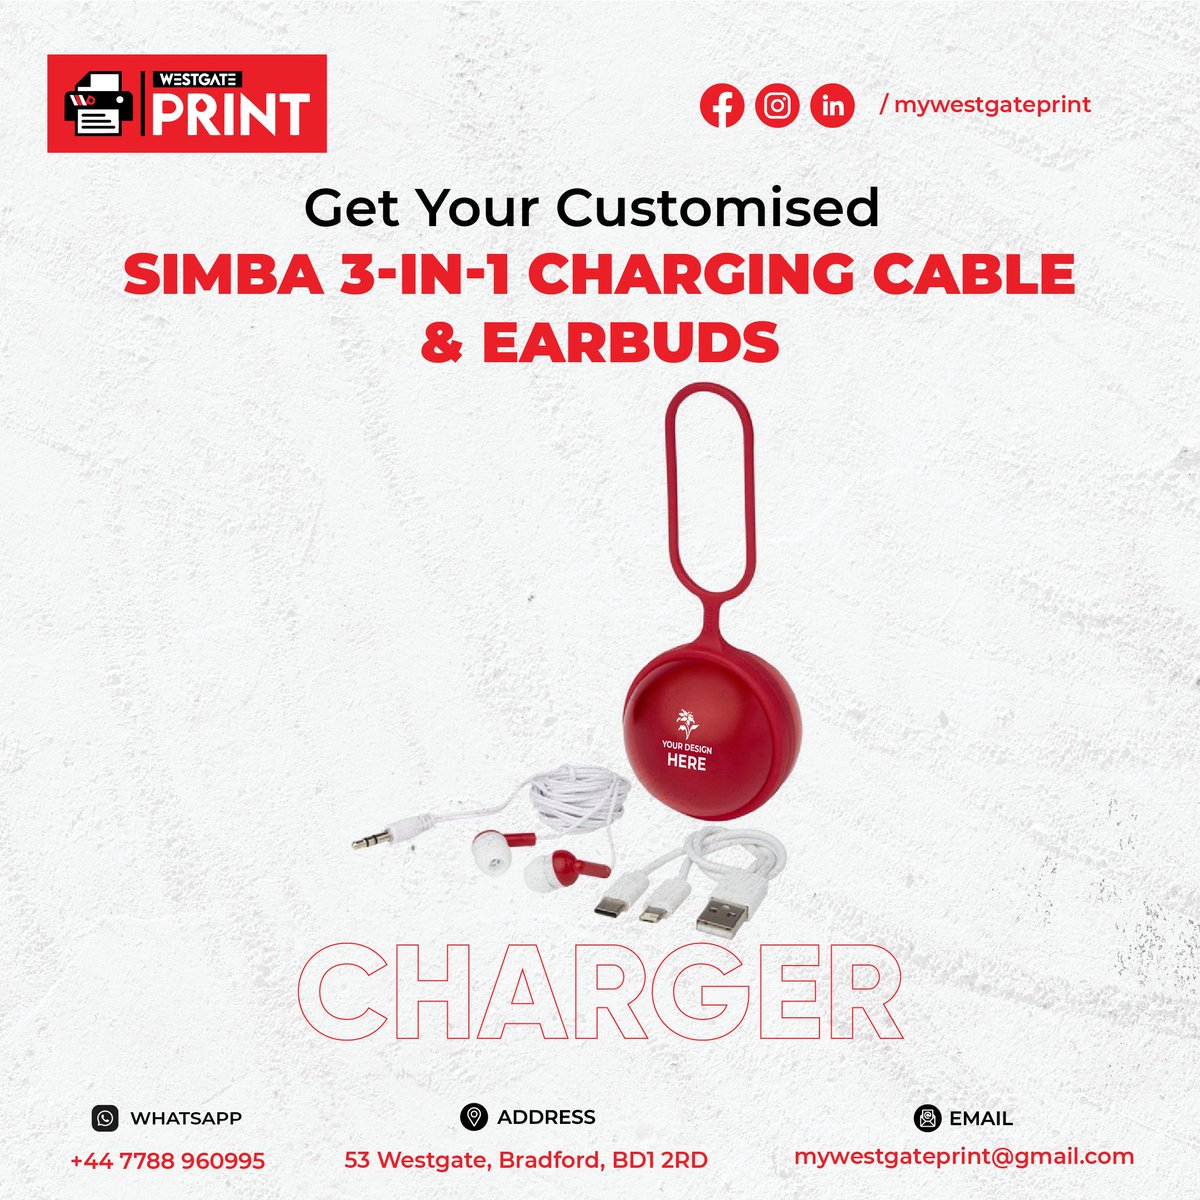 Order now for a seamless audio and charging experience.

#3in1ChargingCable #Earbuds #CustomAccessories #OrderNow #westgateprint_BradFord #uk #mailboxesetc #Real_WestgatePrintBradford #best_westgateprint_bradford #FastPrint_Bradford